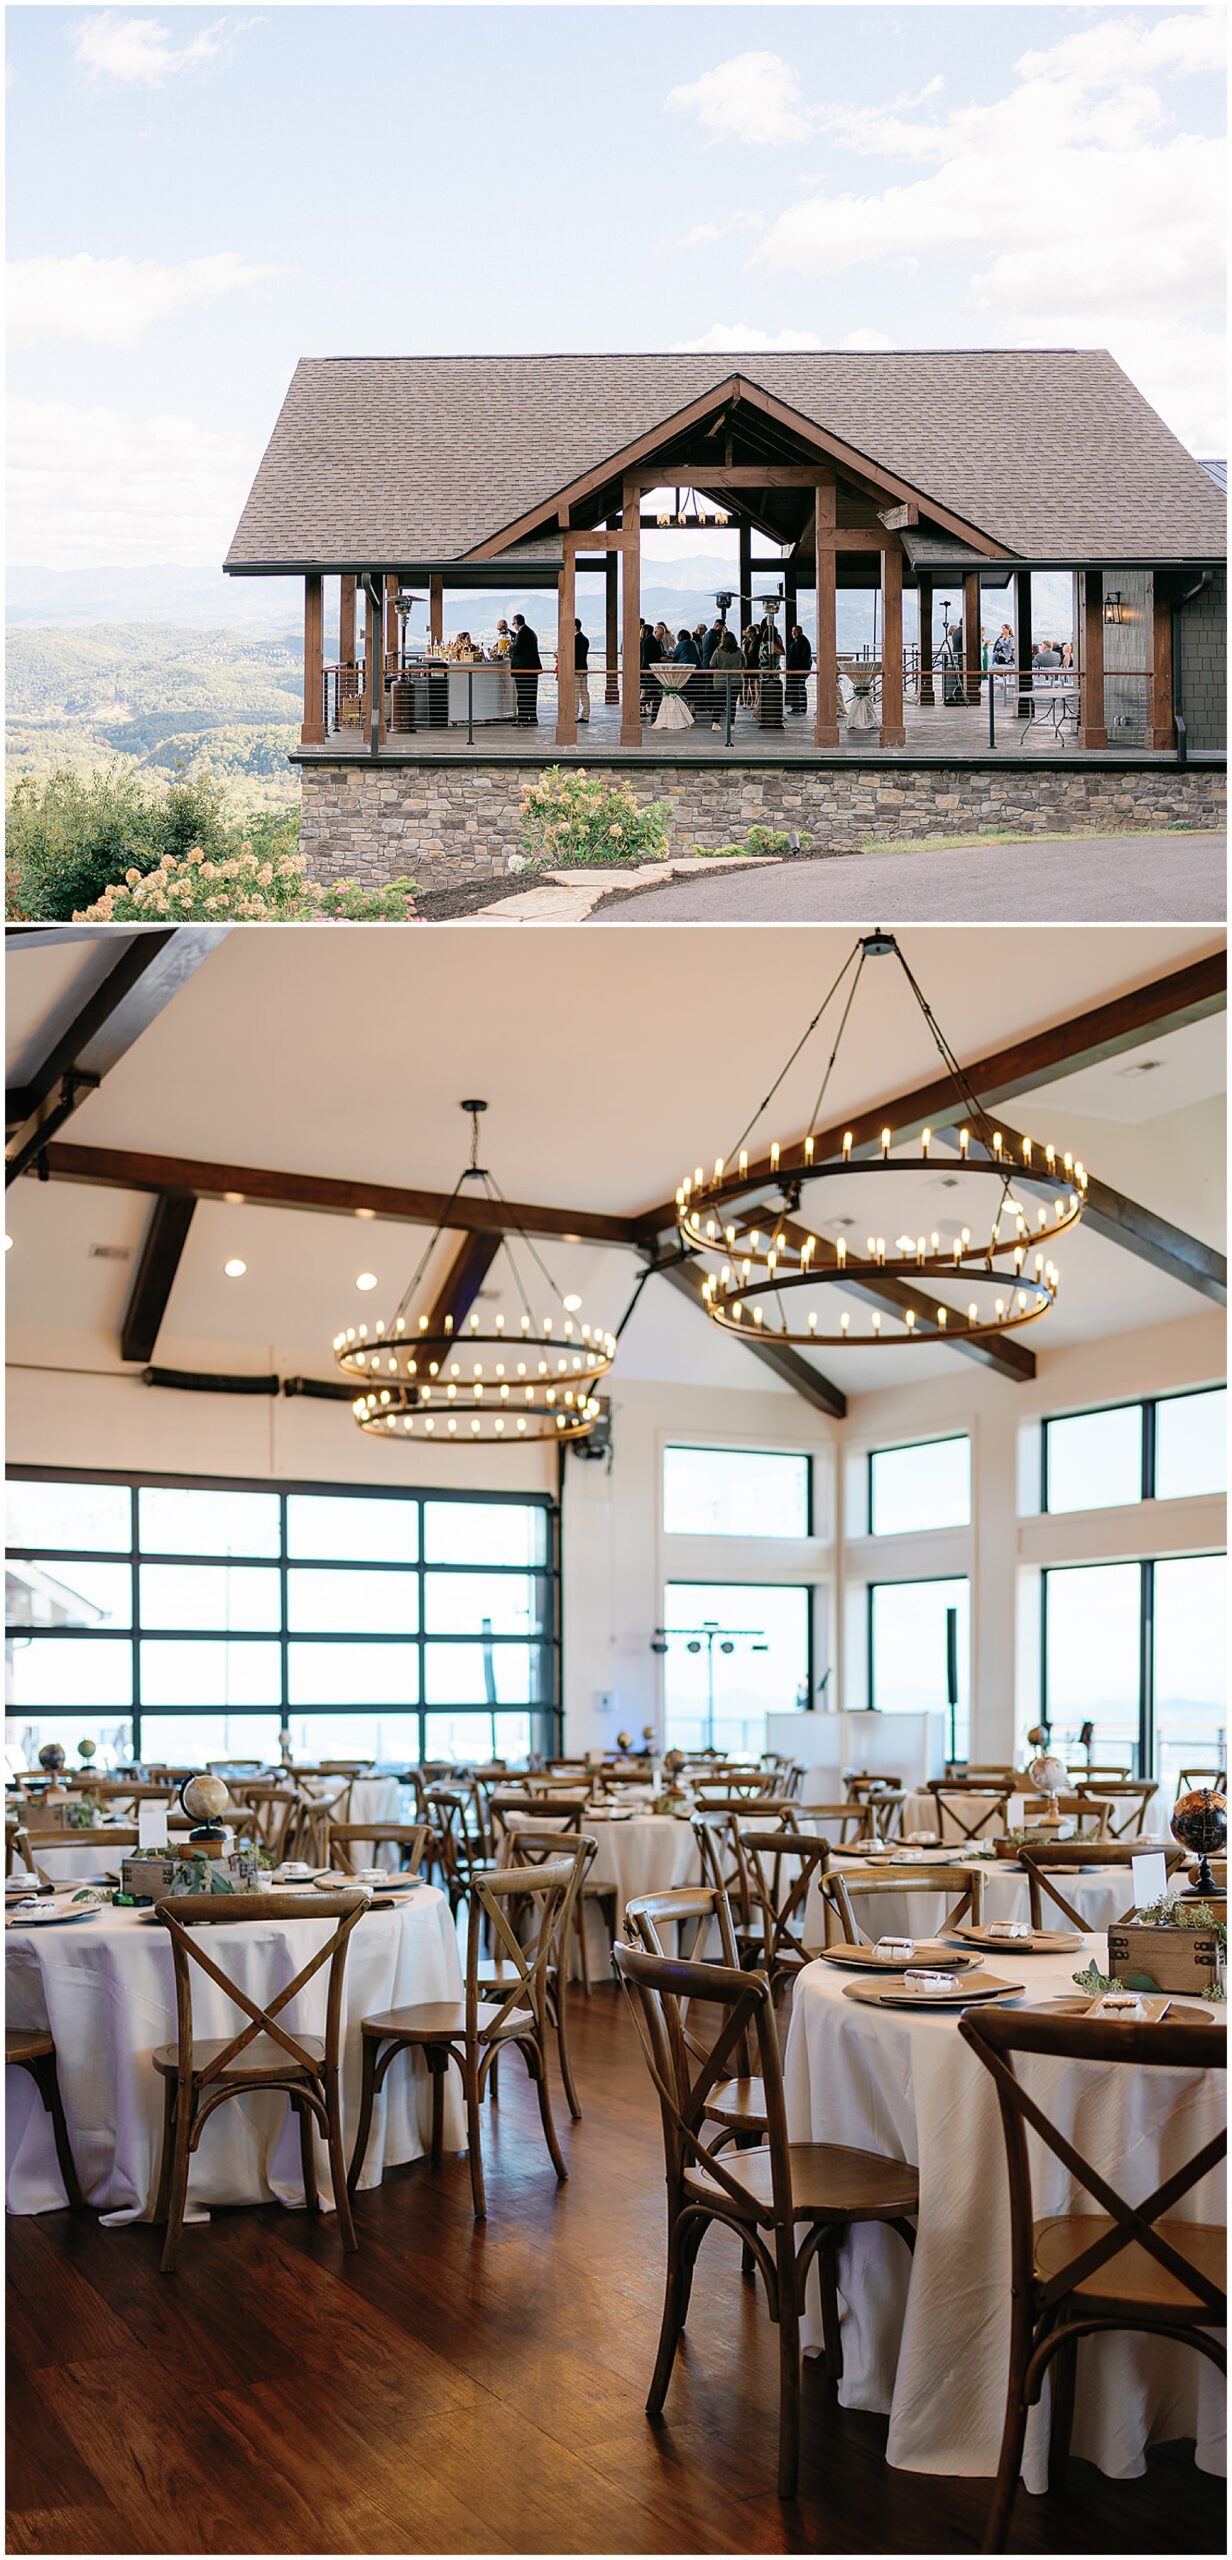 Details of the exterior and interior of the the trillium venue wedding reception hall